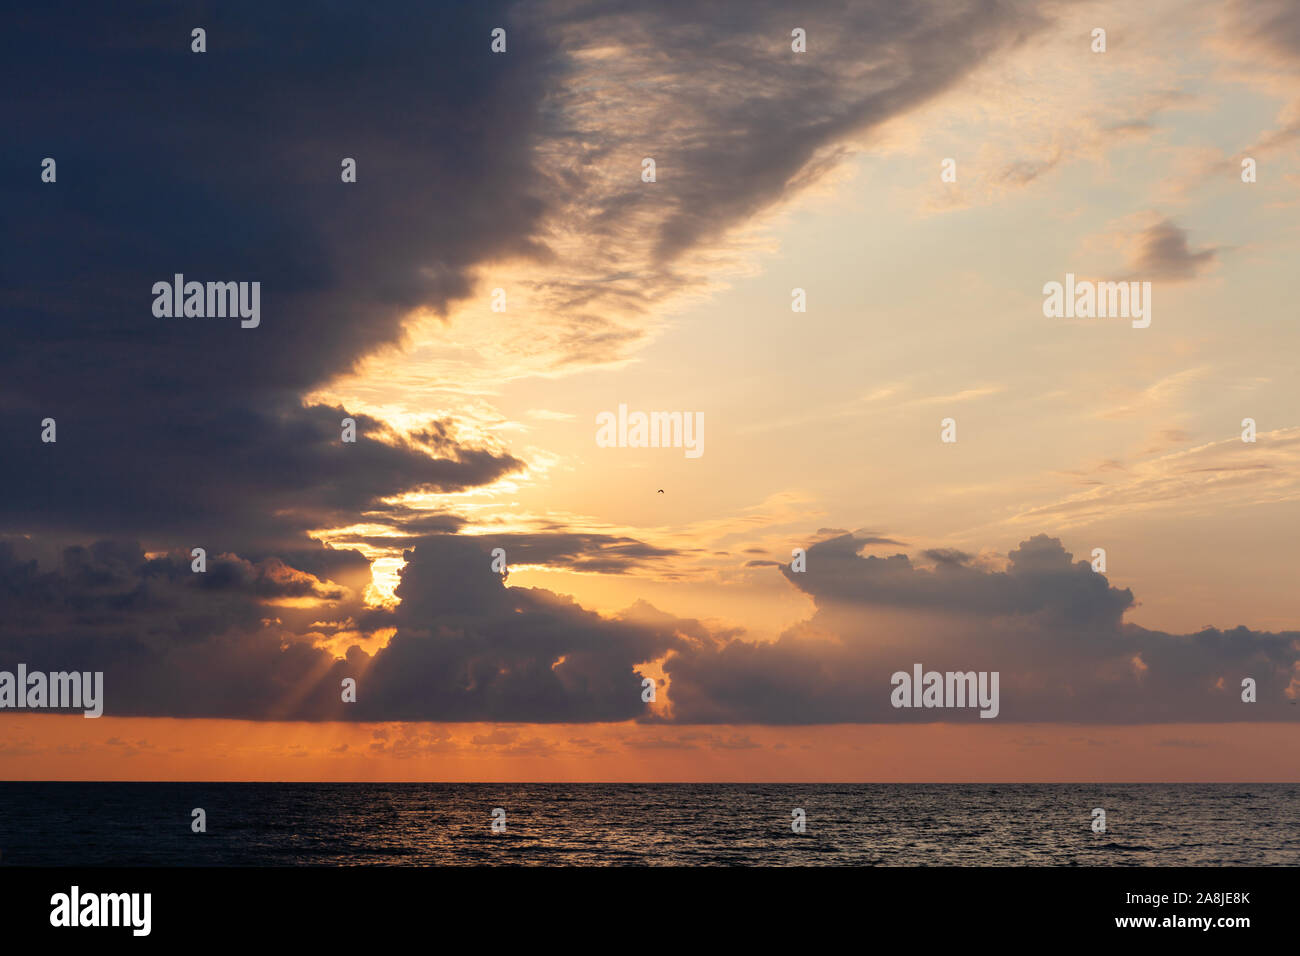 Beautiful sunset seascape with dark clouds Stock Photo